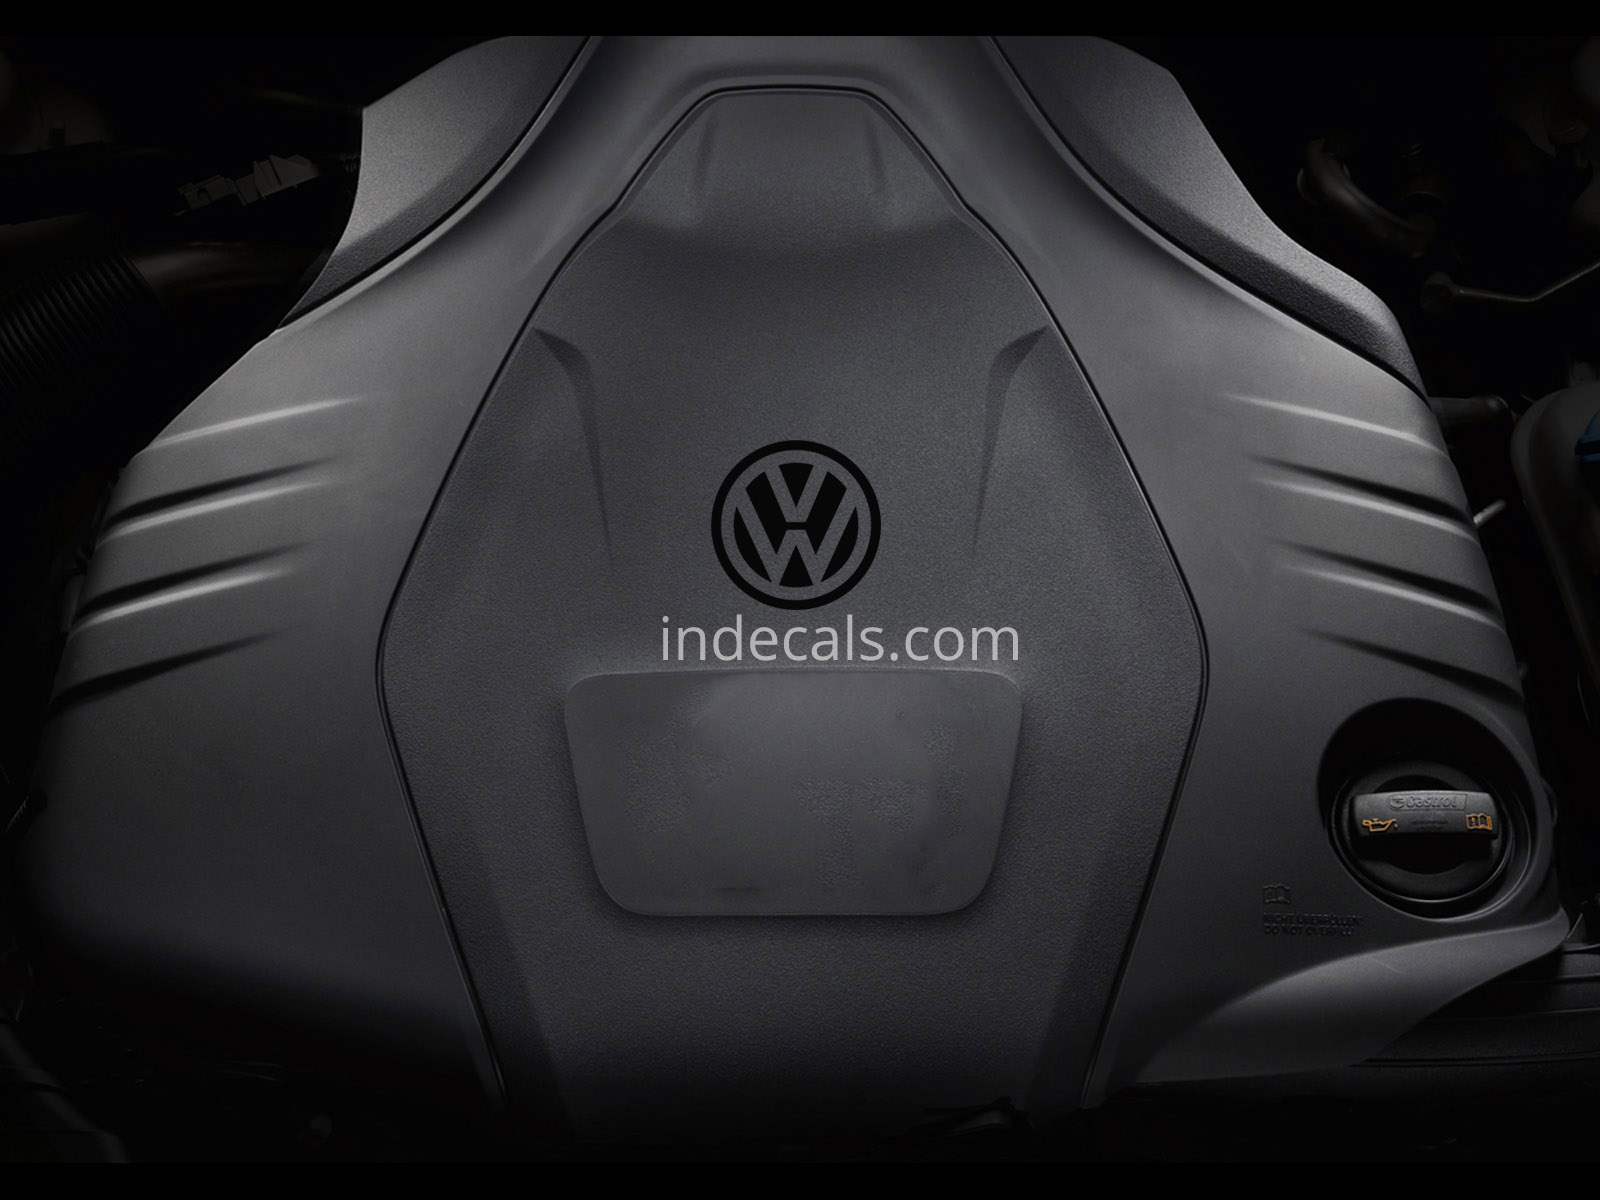 3 x Volkswagen Stickers for Engine Cover - Black